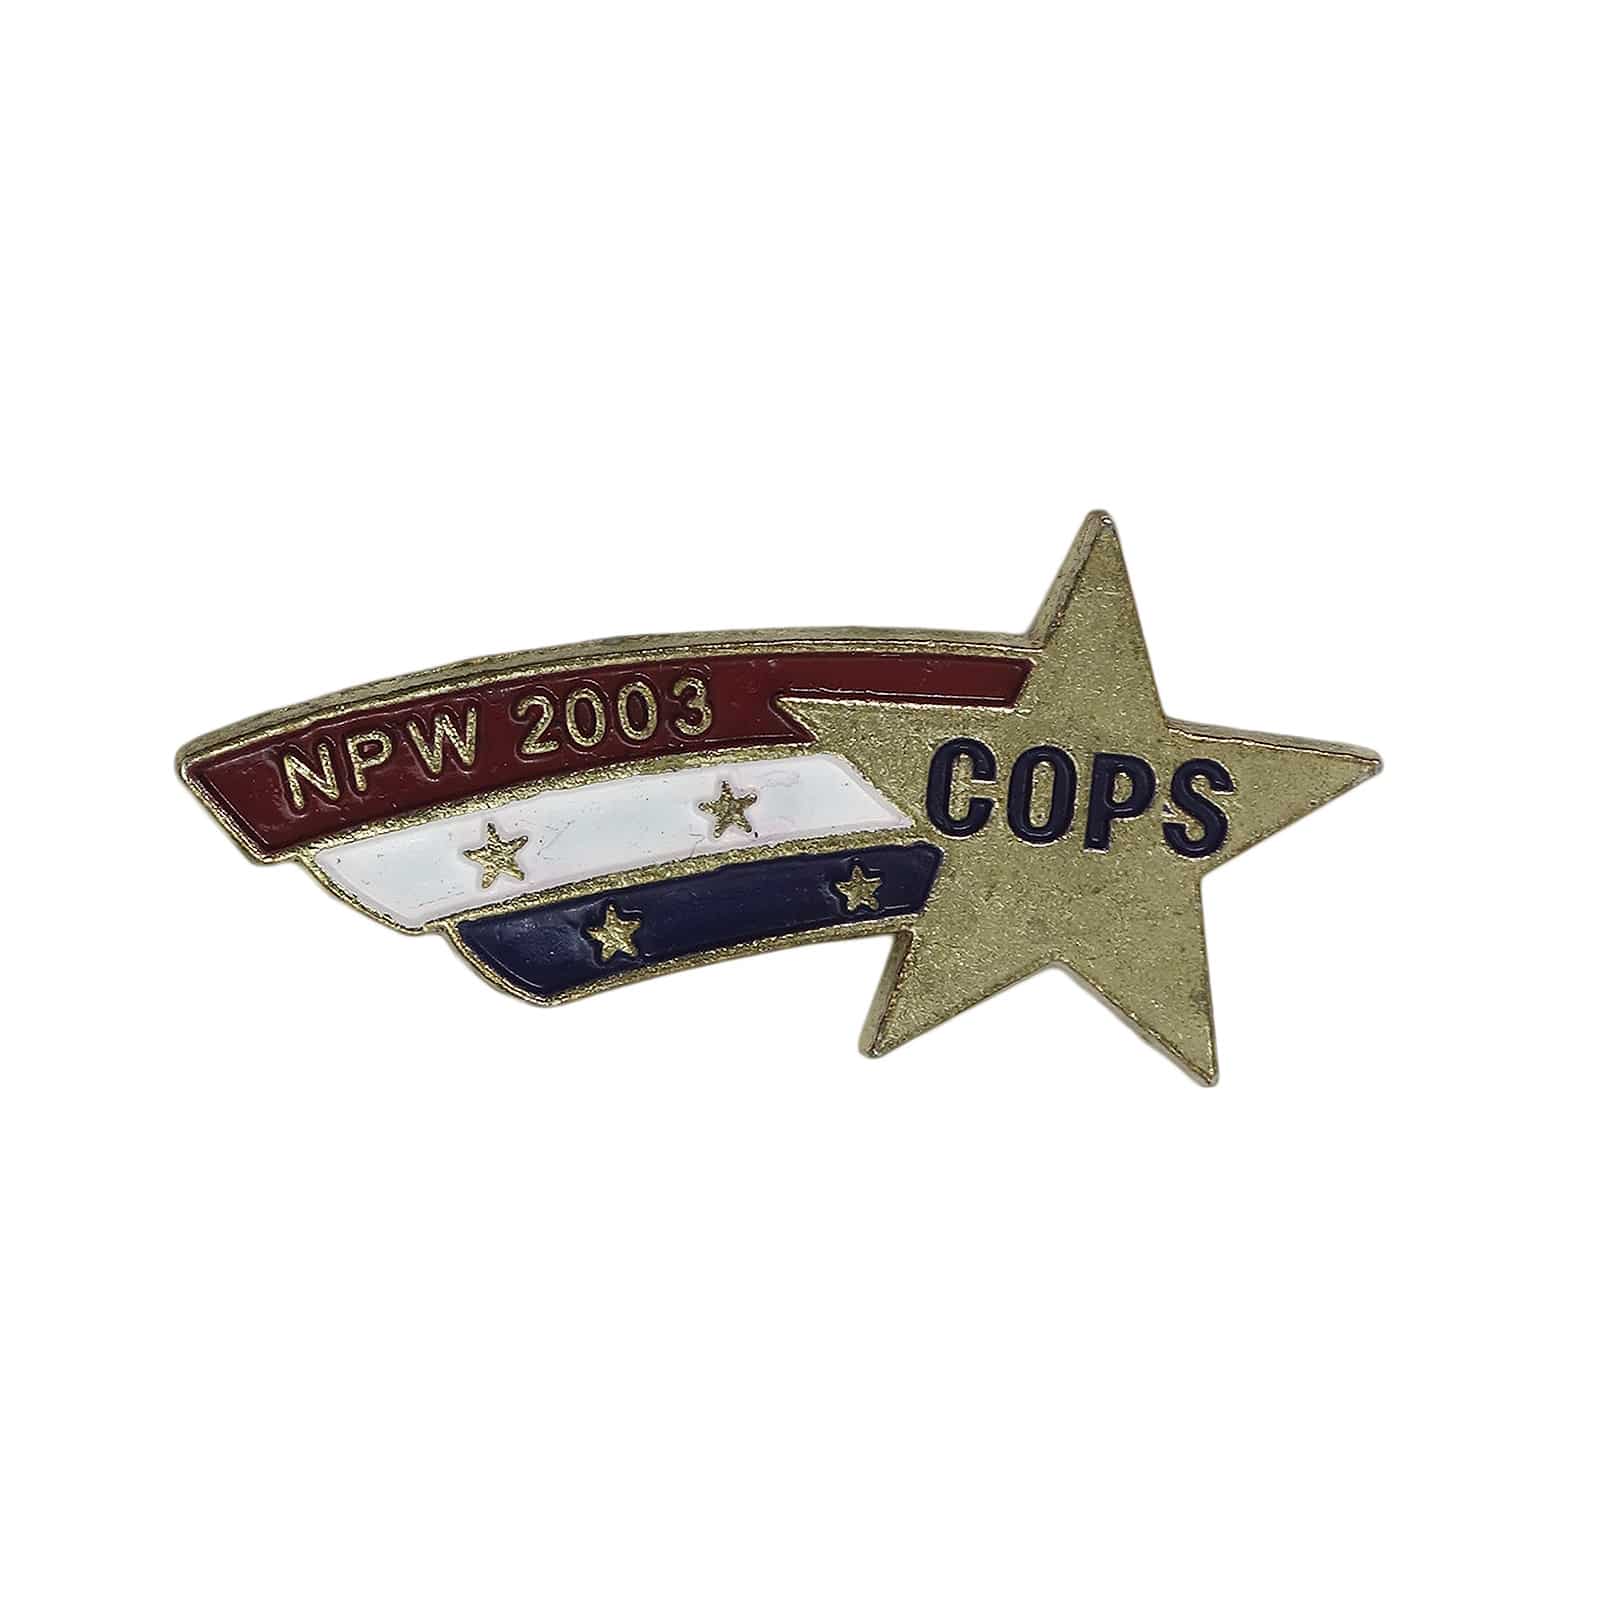 COPS ピンズ National Police Week 2003 留め具付き